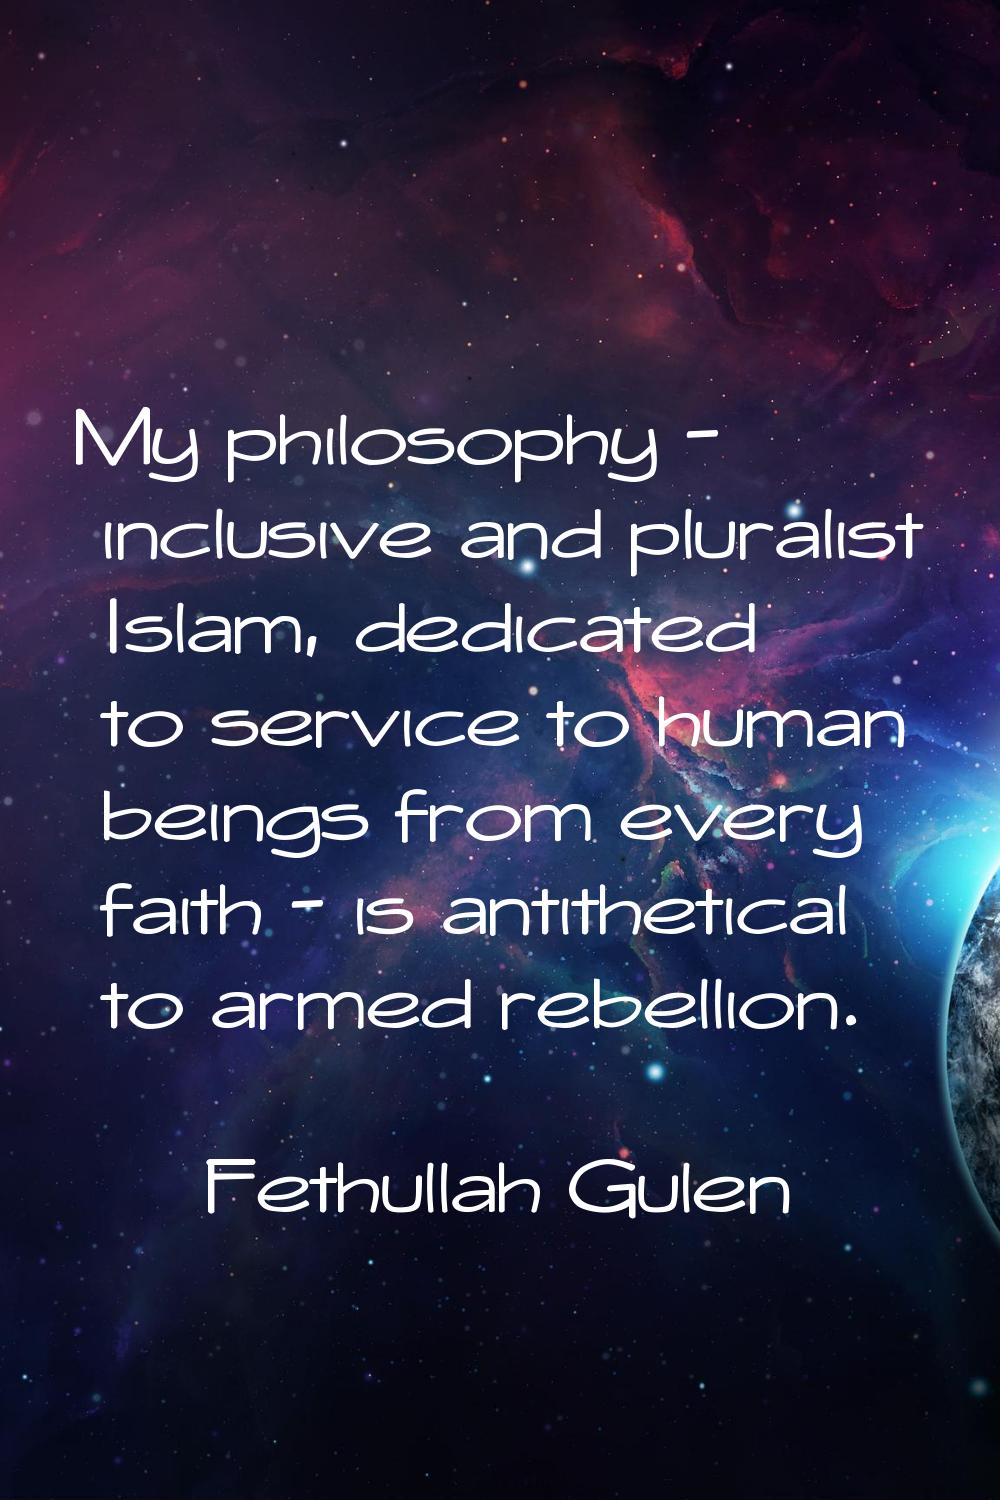 My philosophy - inclusive and pluralist Islam, dedicated to service to human beings from every fait